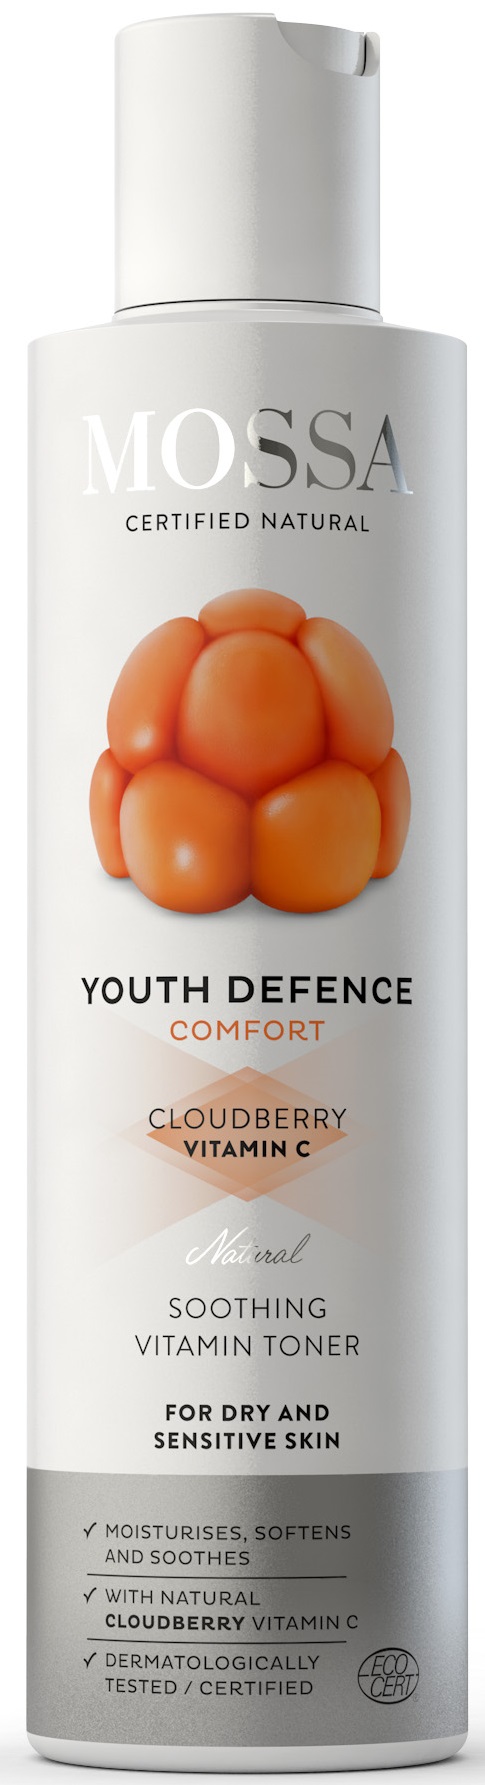 Mossa Youth Defence Soothing Vitamin Toner